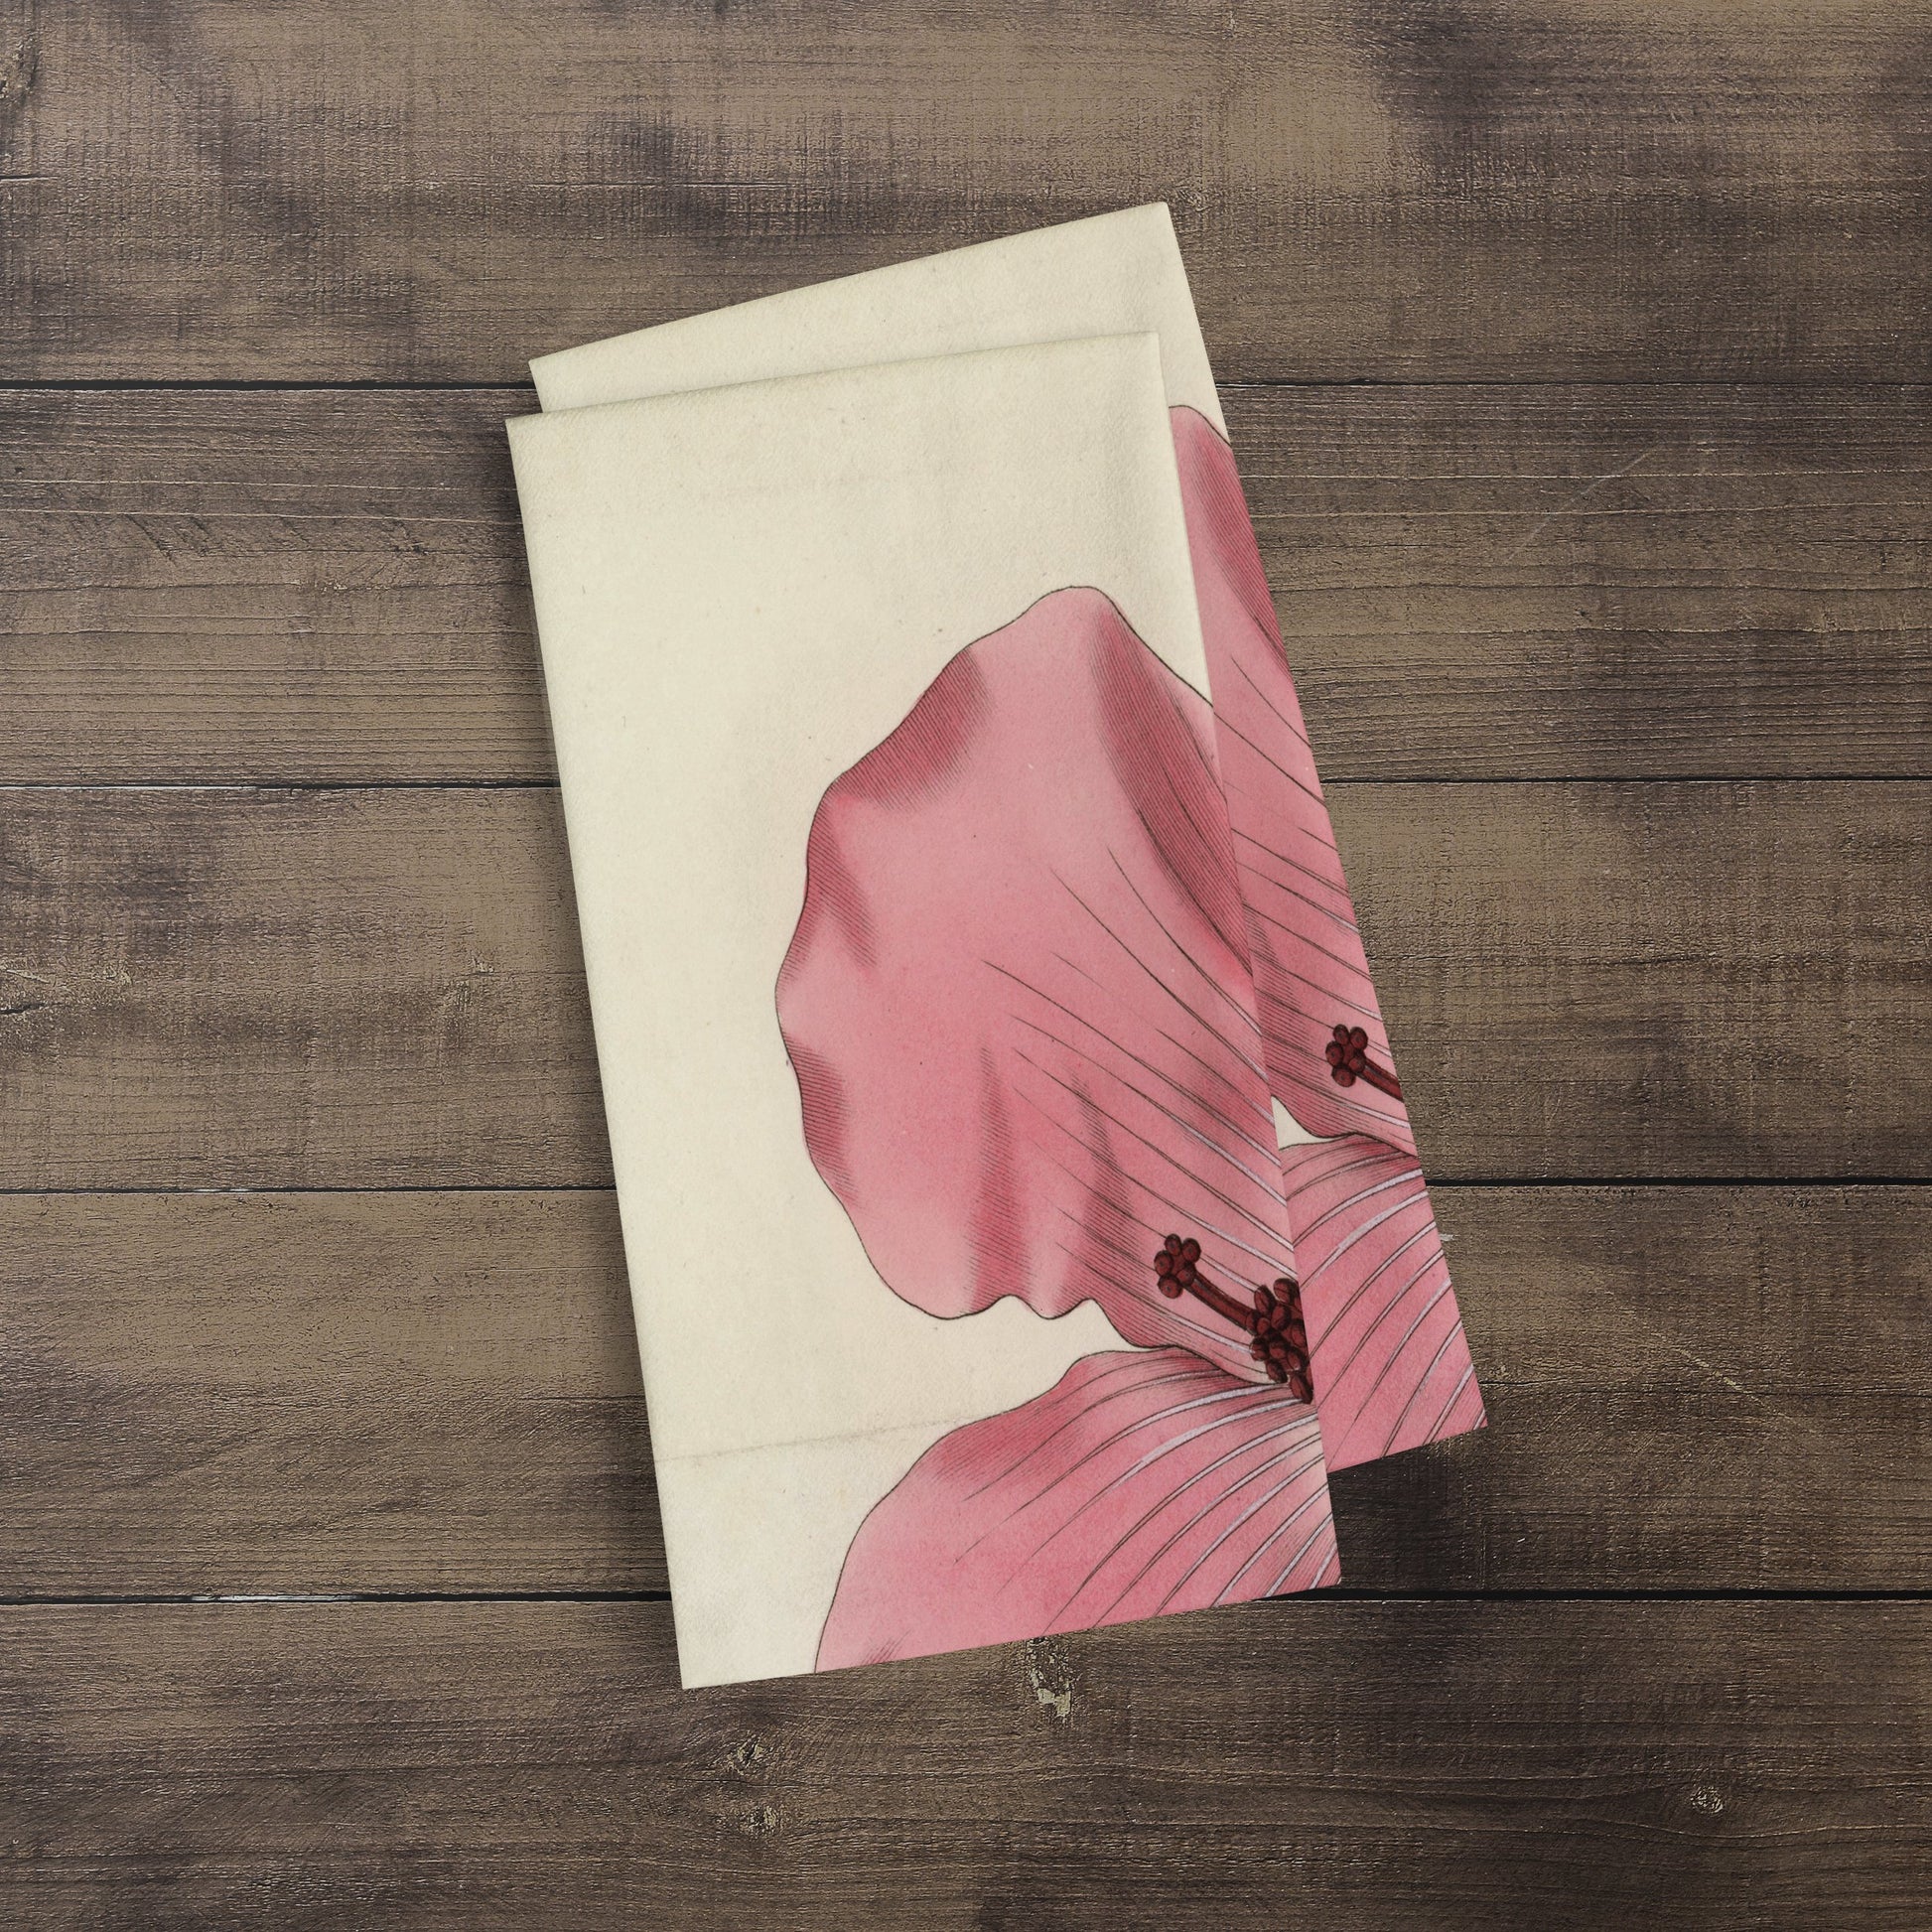 A photograph of the Hibiscus Botanical Print kitchen/tea towel folded over showing just part of the print. It is a William Curtis’s Print from 1790-1800